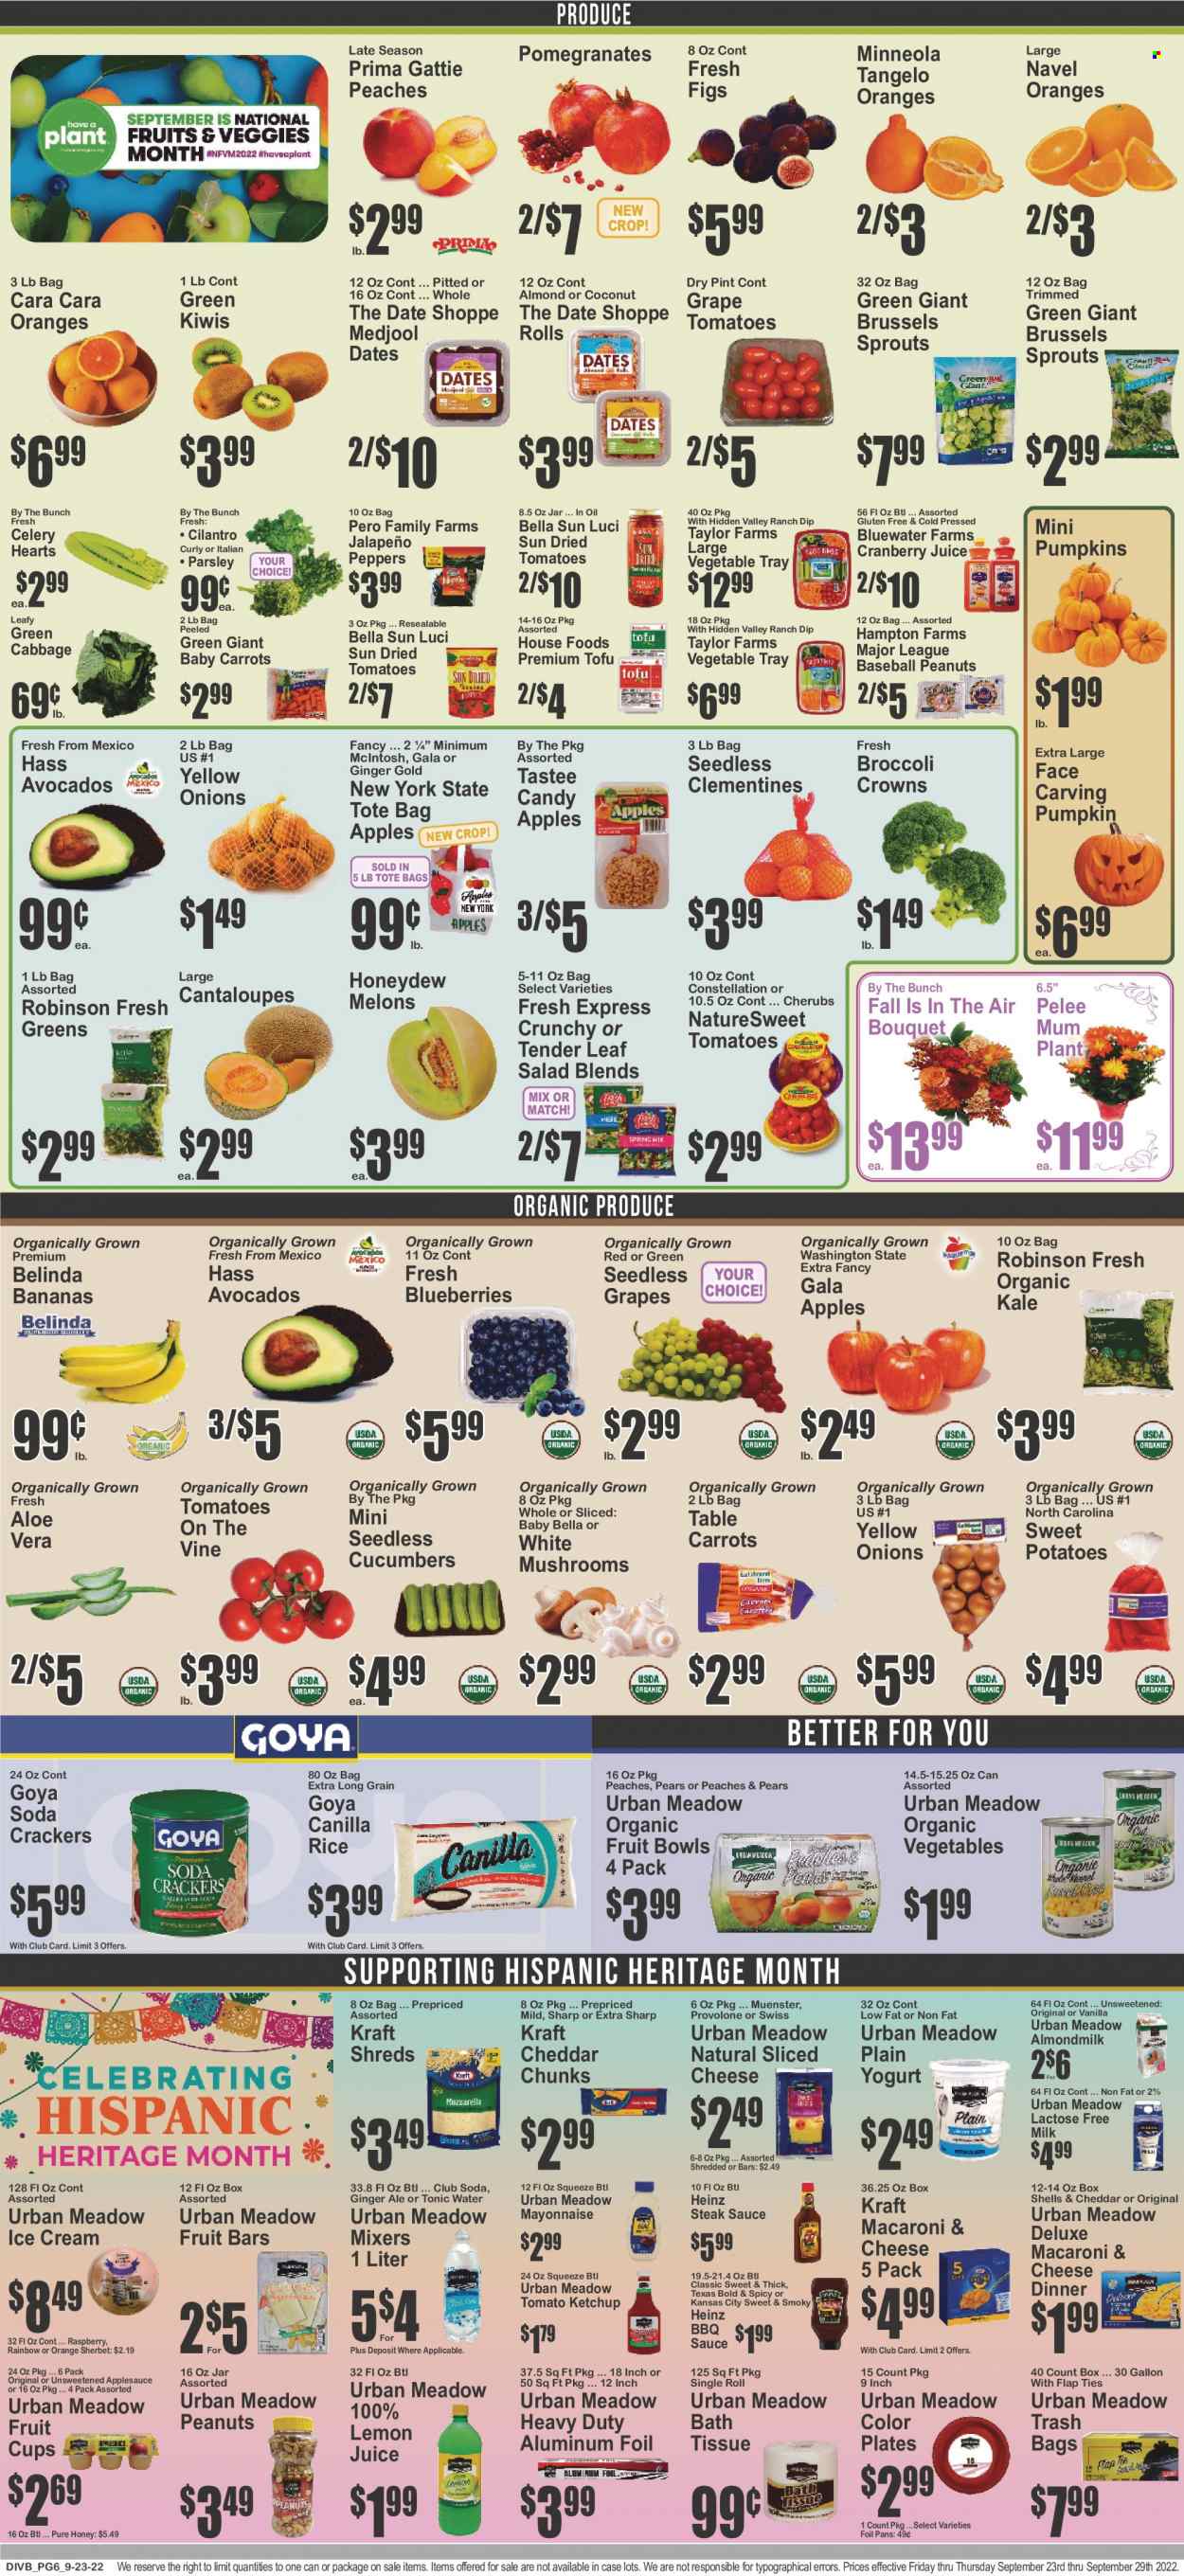 thumbnail - Super Fresh Flyer - 09/23/2022 - 09/29/2022 - Sales products - mushrooms, cabbage, cantaloupe, carrots, celery, cucumber, sweet potato, kale, potatoes, pumpkin, parsley, onion, salad, jalapeño, brussel sprouts, sleeved celery, avocado, figs, Gala, kiwi, seedless grapes, honeydew, pears, oranges, fruit cup, macaroni & cheese, sauce, Kraft®, sliced cheese, Münster cheese, tofu, Provolone, almond milk, milk, lactose free milk, mayonnaise, dip, ice cream, sherbet, crackers, dried tomatoes, Heinz, Goya, Bella Sun Luci, rice, cilantro, BBQ sauce, steak sauce, ketchup, apple sauce, honey, peanuts, cranberry juice, ginger ale, tonic, Club Soda, lemon juice, steak, bath tissue, Mum, clementines, melons, pomegranate, peaches, navel oranges. Page 6.